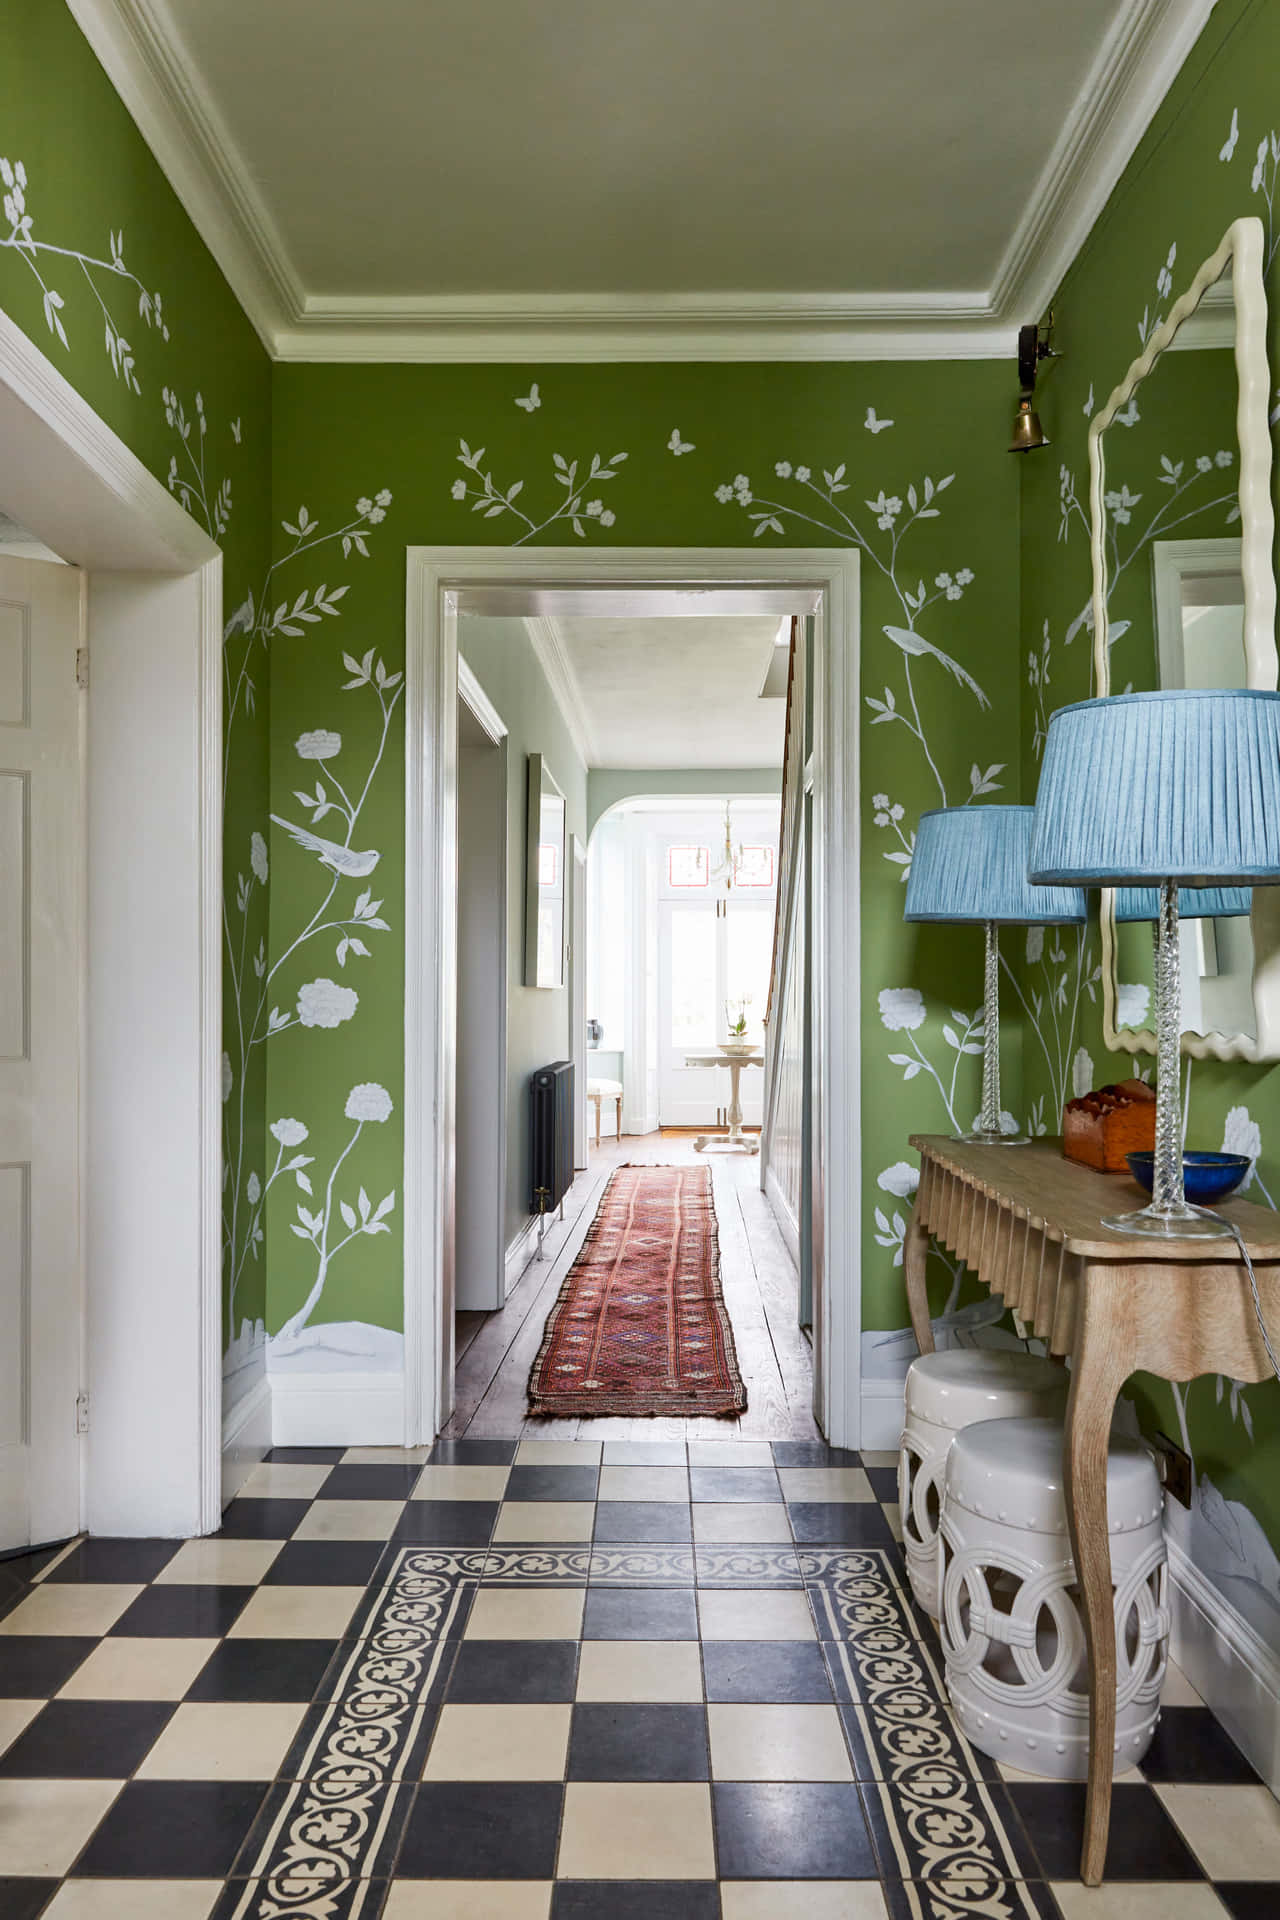 A Hallway With Green Walls And A Checkered Floor